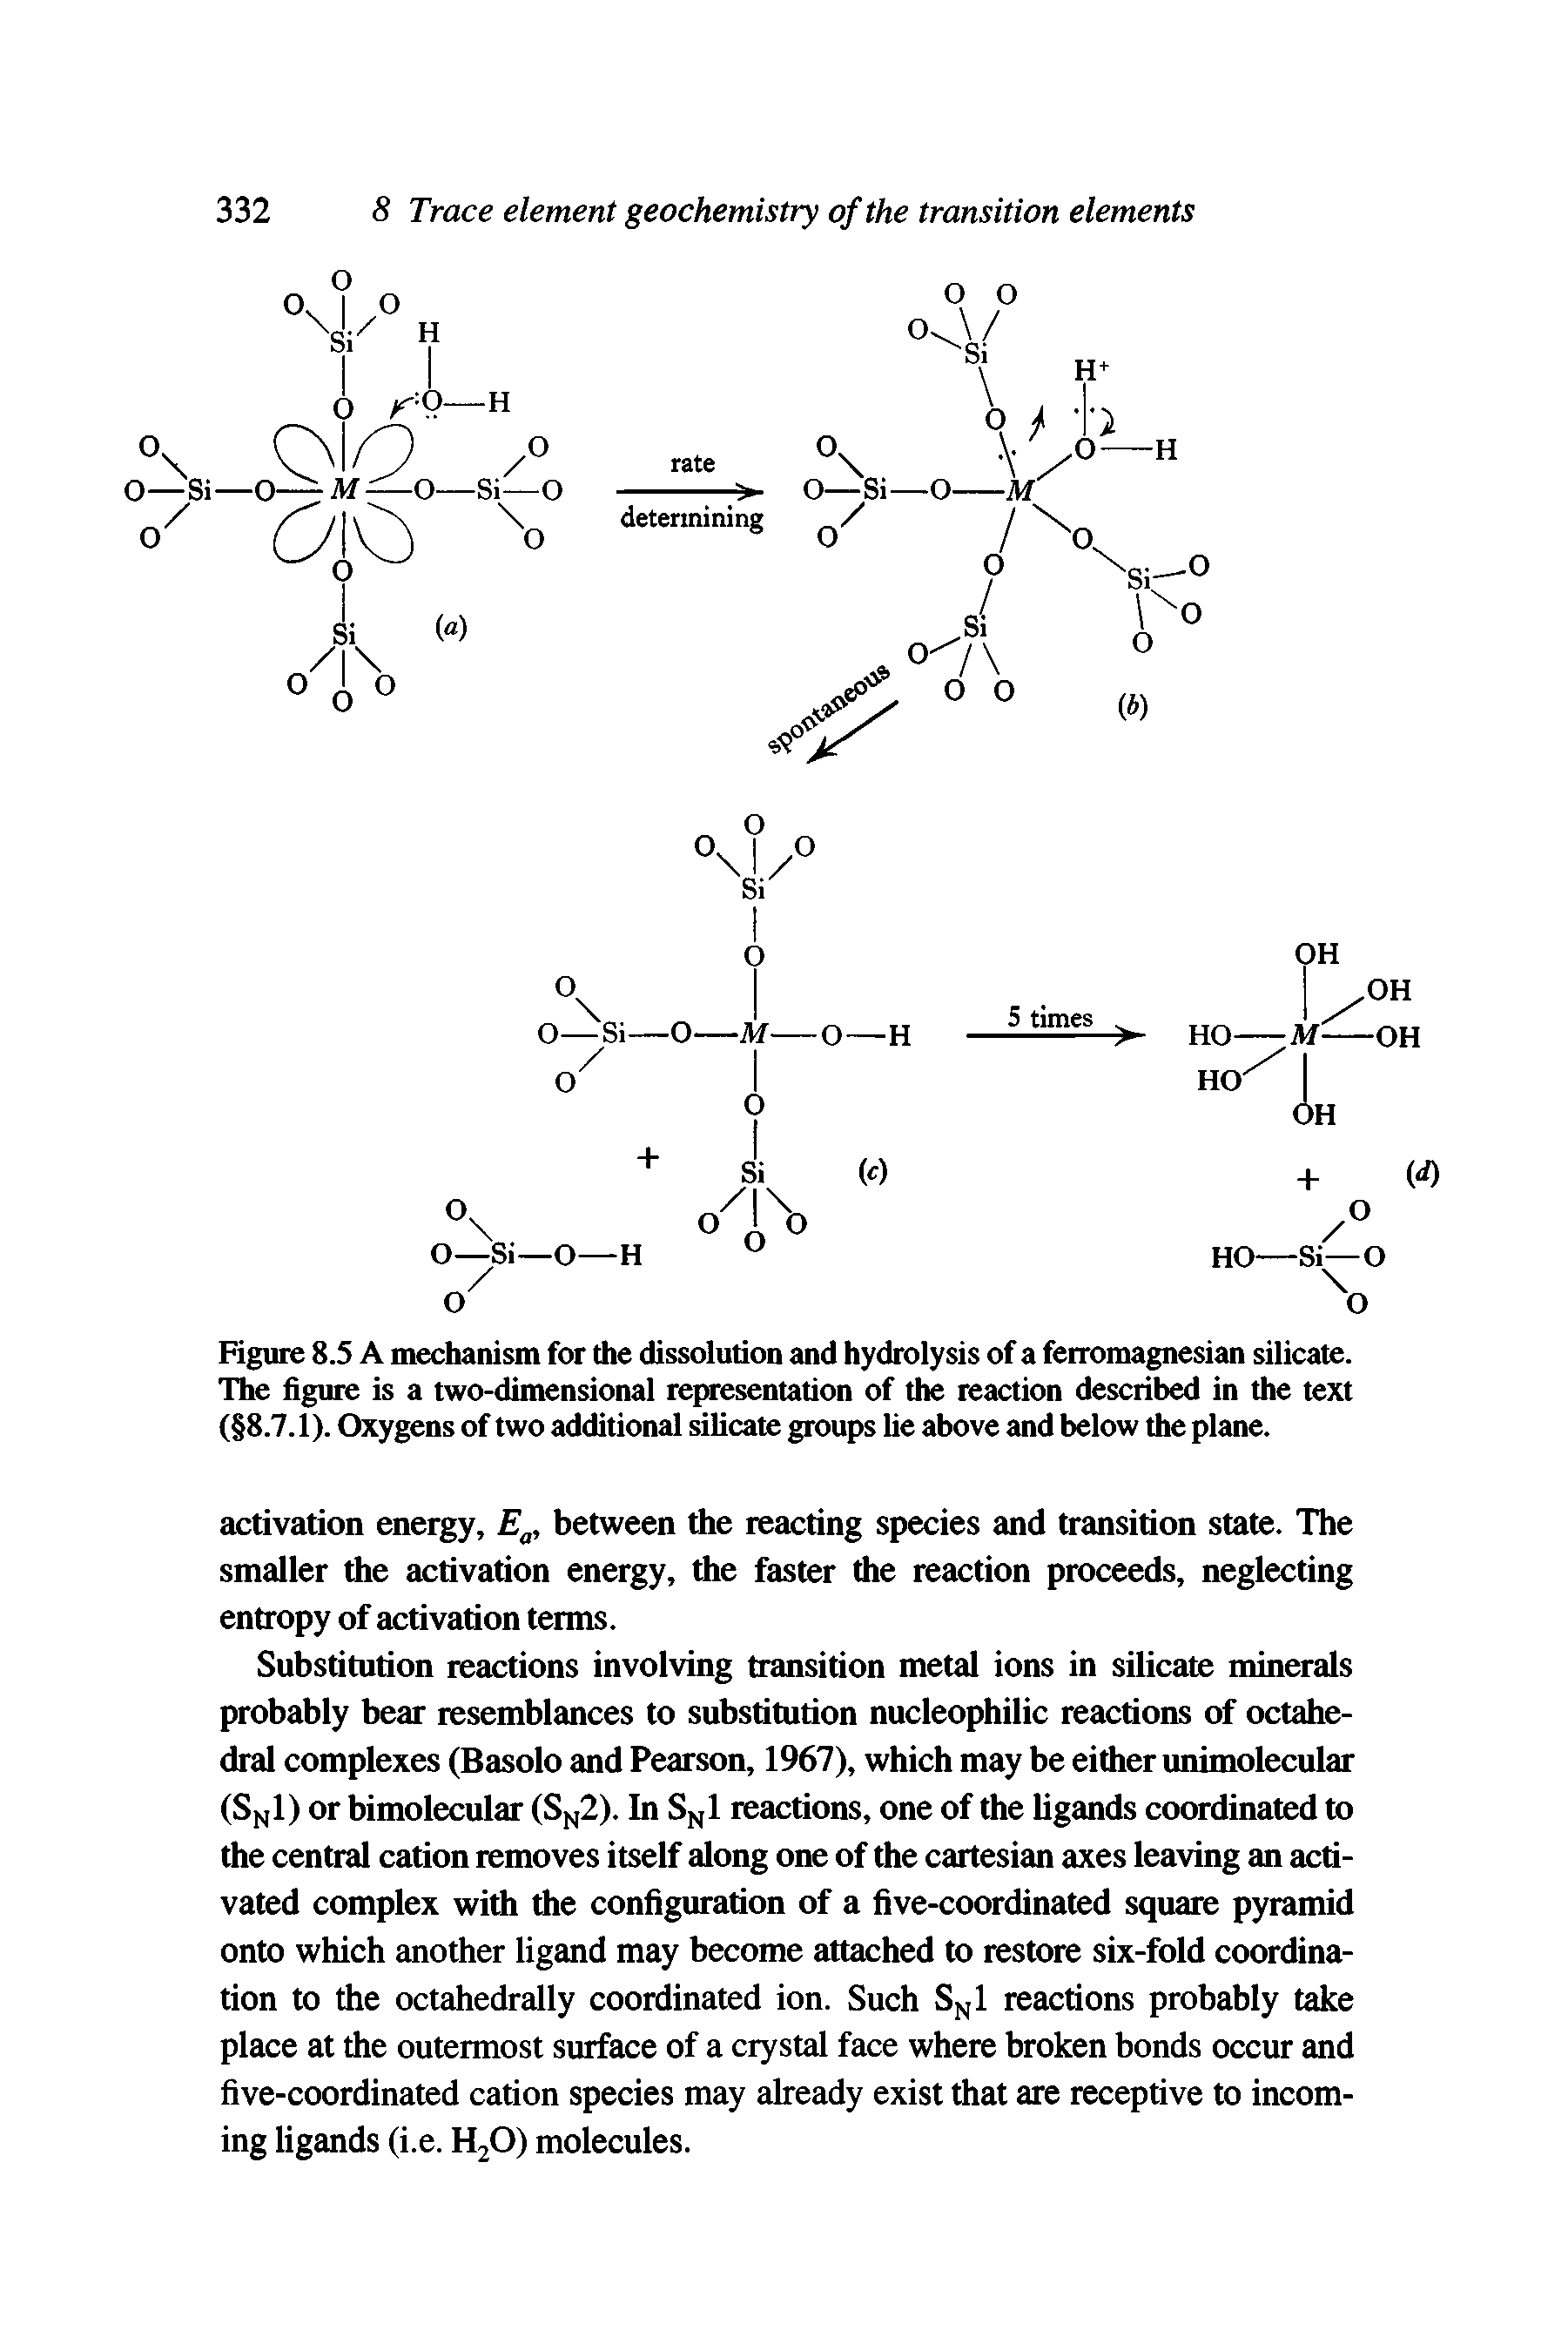 Figure 8.5 A mechanism for the dissolution and hydrolysis of a ferromagnesian silicate. The figure is a two-dimensional representation of the reaction described in the text ( 8.7.1). Oxygens of two additional silicate groups lie above and below the plane.